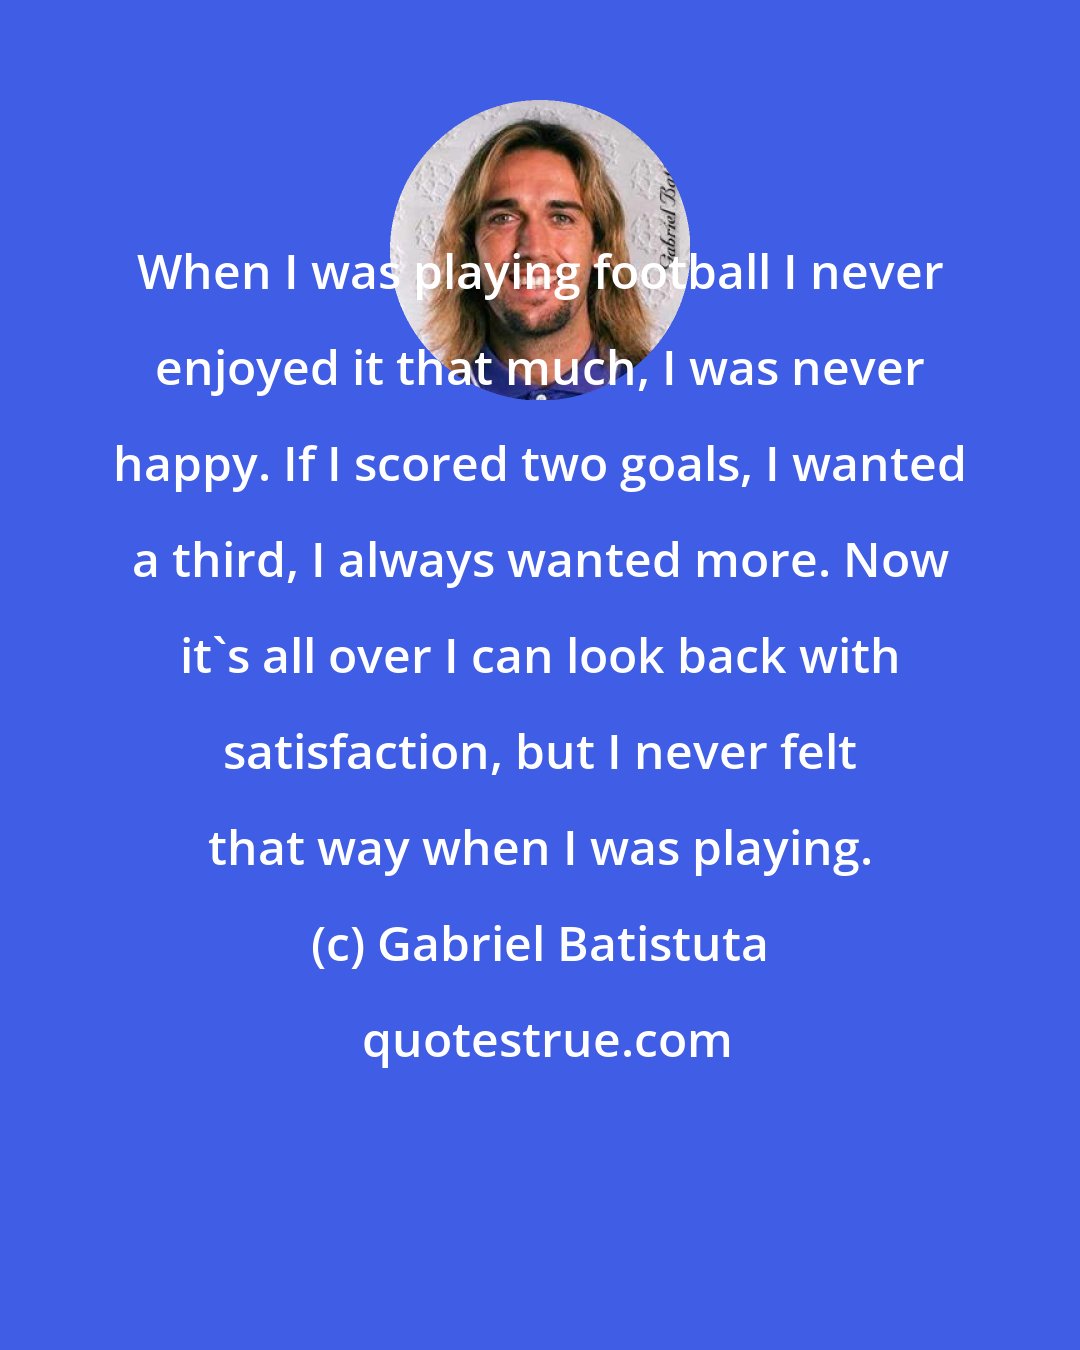 Gabriel Batistuta: When I was playing football I never enjoyed it that much, I was never happy. If I scored two goals, I wanted a third, I always wanted more. Now it's all over I can look back with satisfaction, but I never felt that way when I was playing.